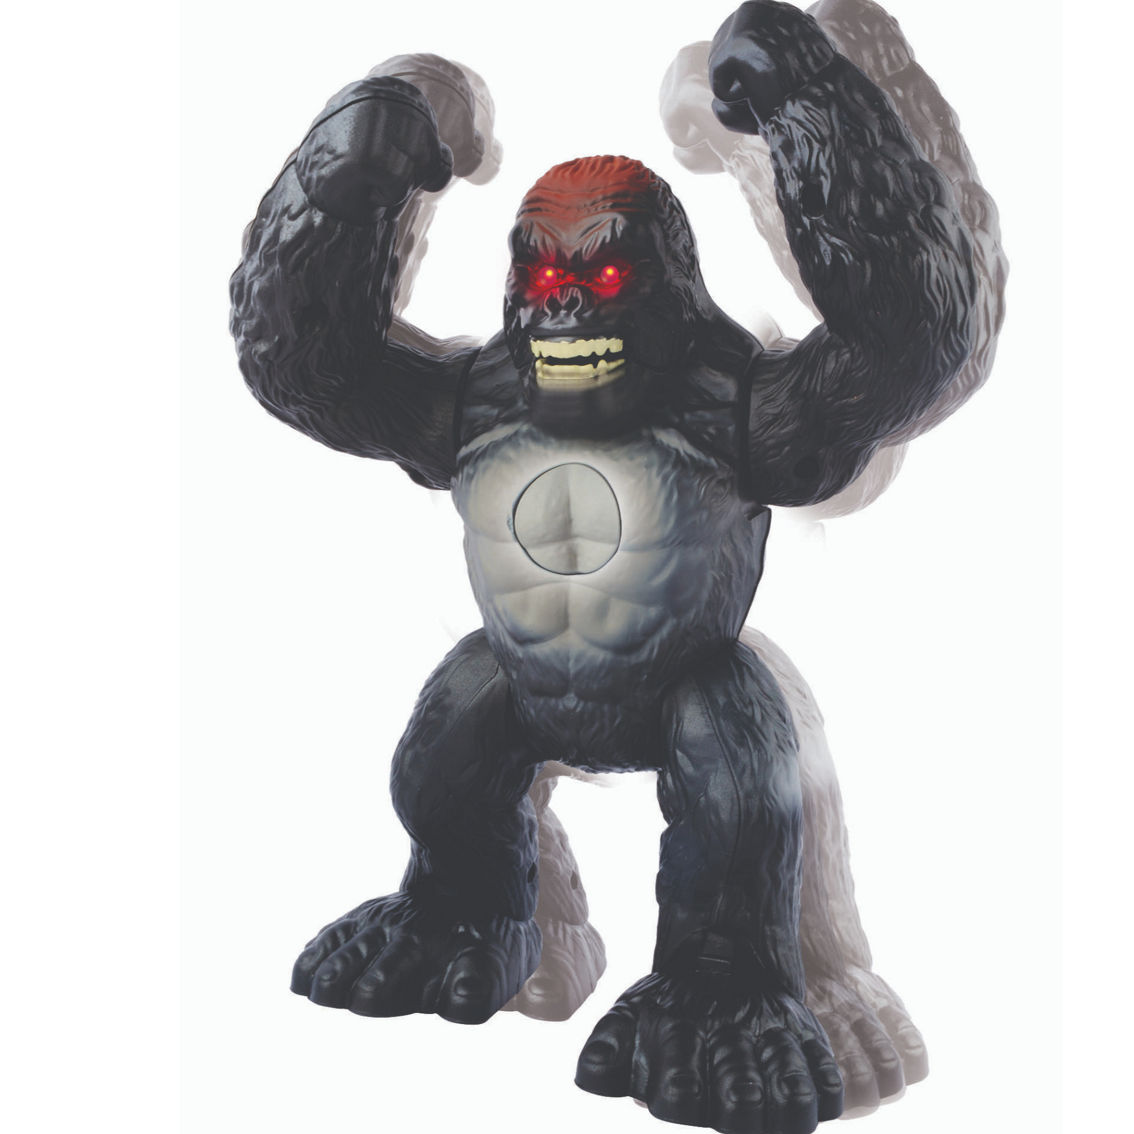 Red Box Light and Sound Walking Gorilla Toy - Image 3 of 6